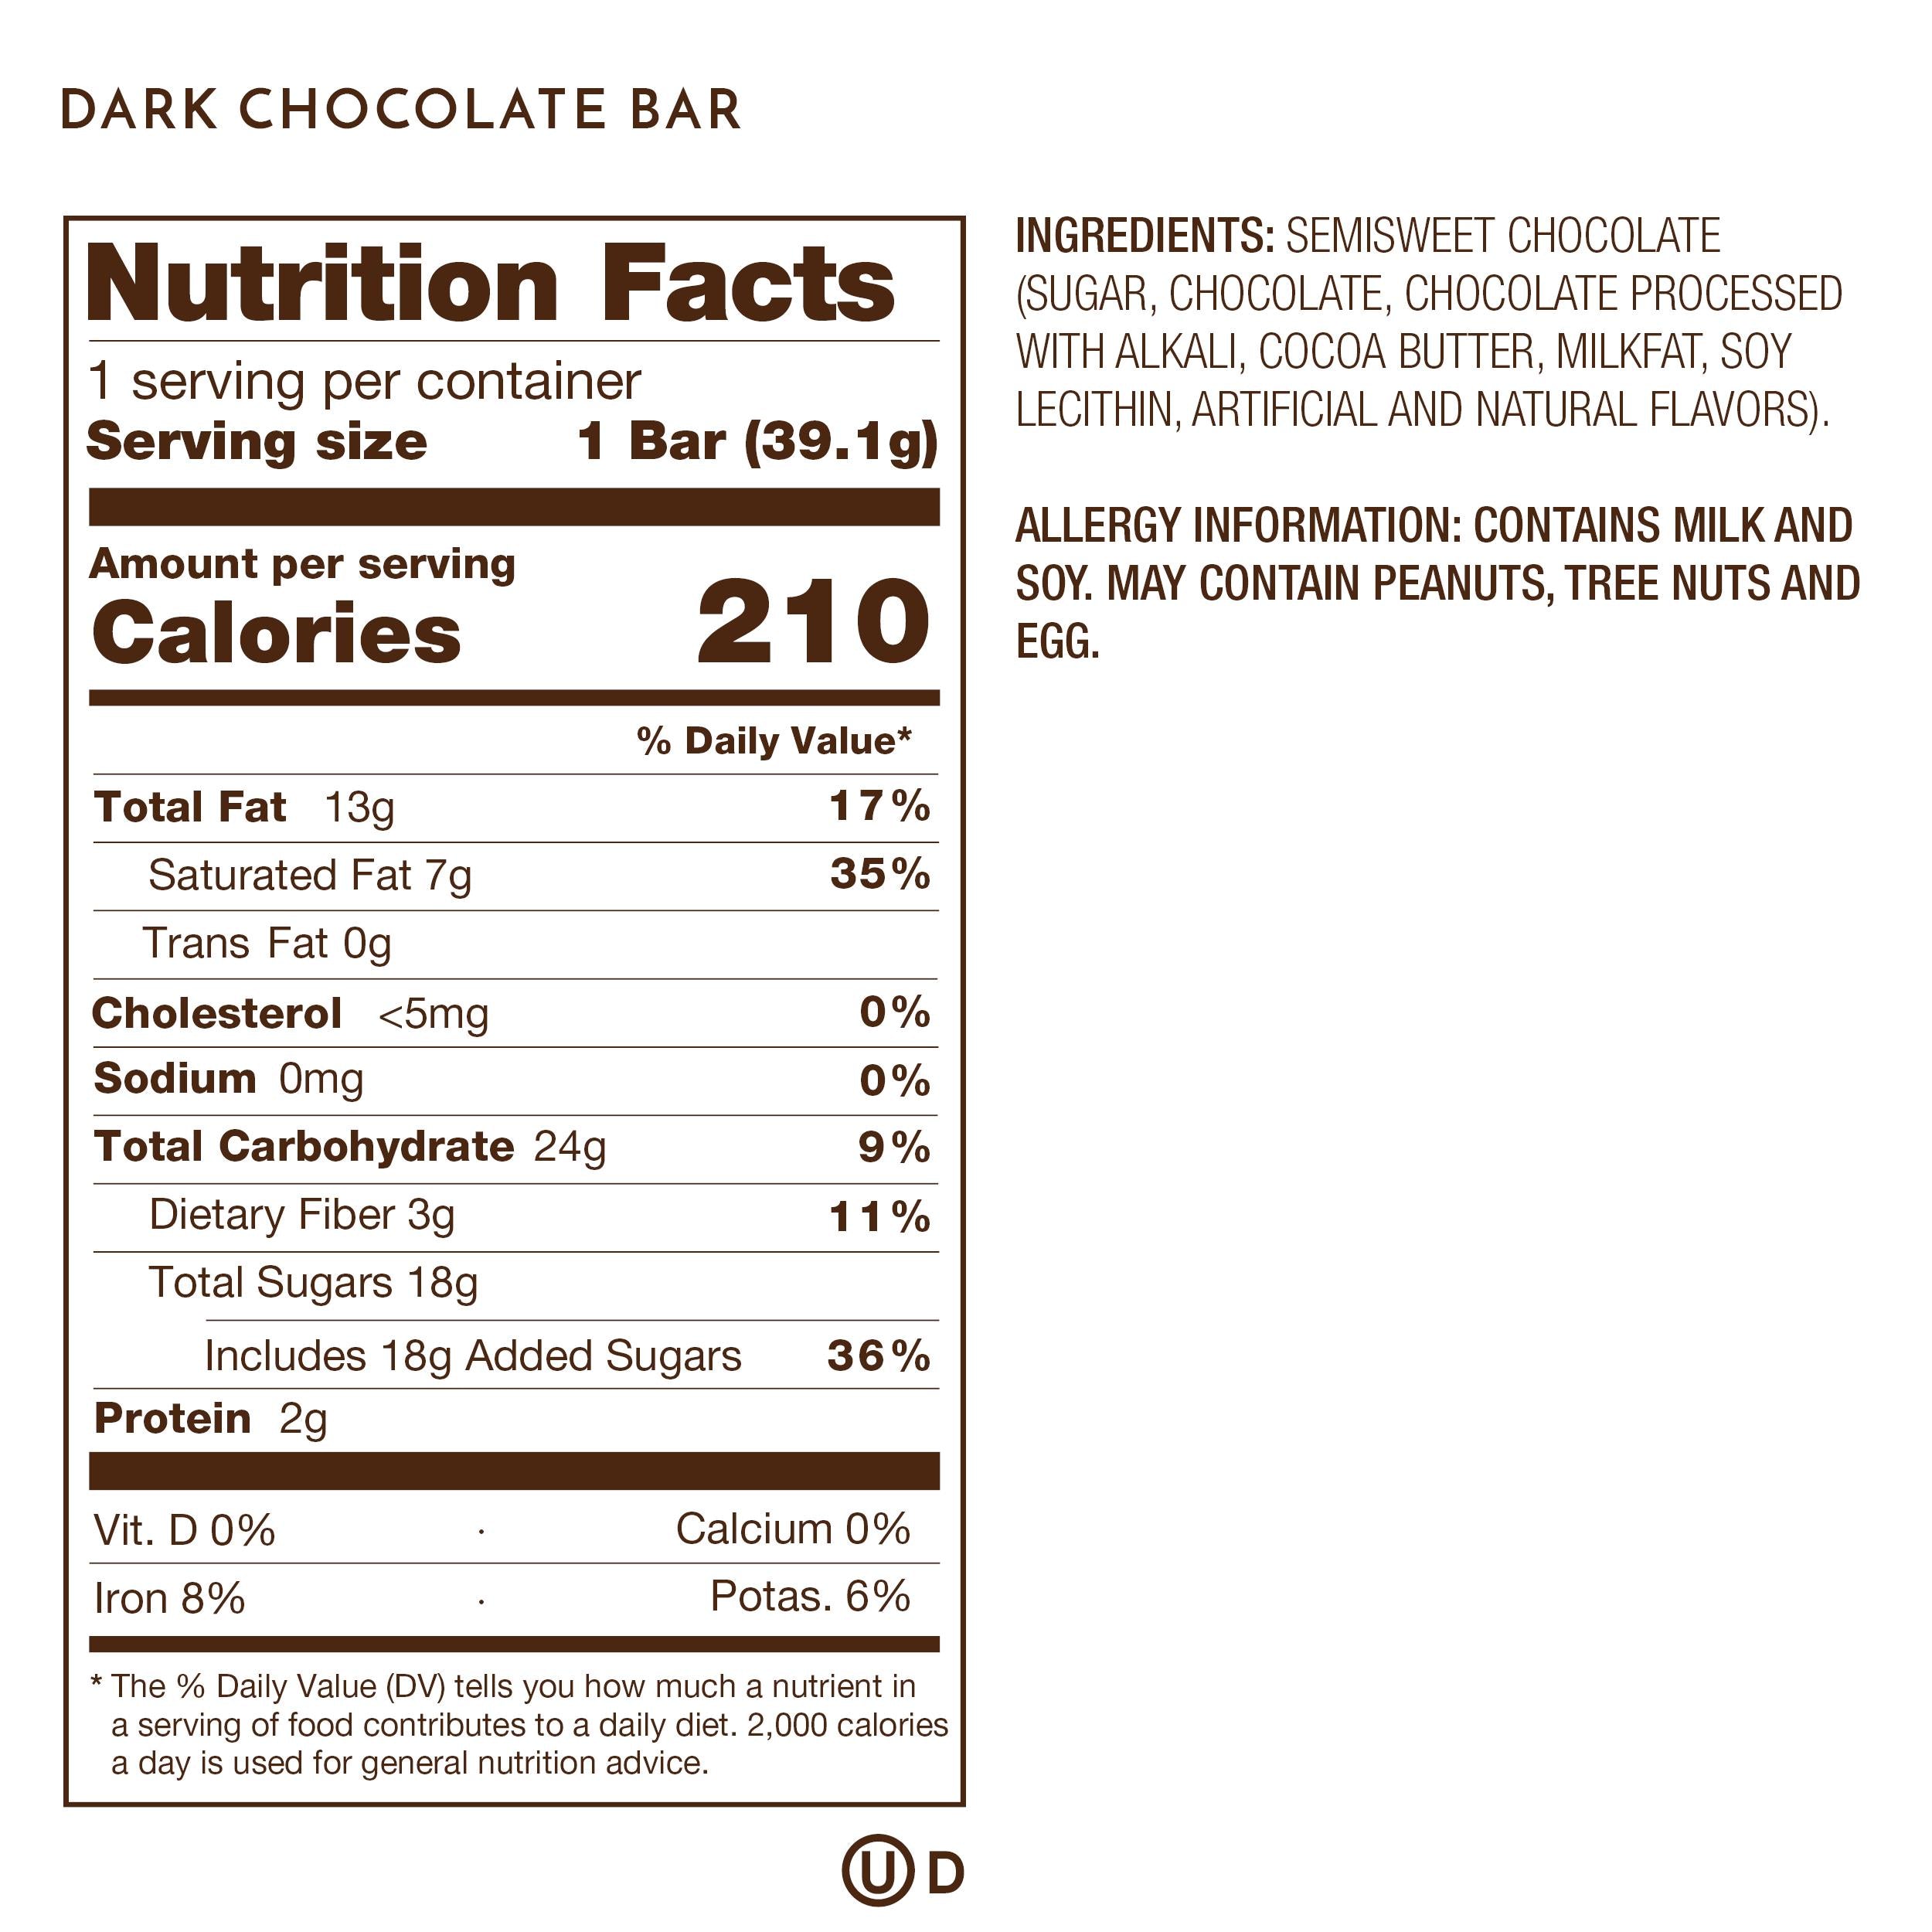 Nutrition Facts, Allergy and Ingredients on Premium Dark Chocolate Bars.